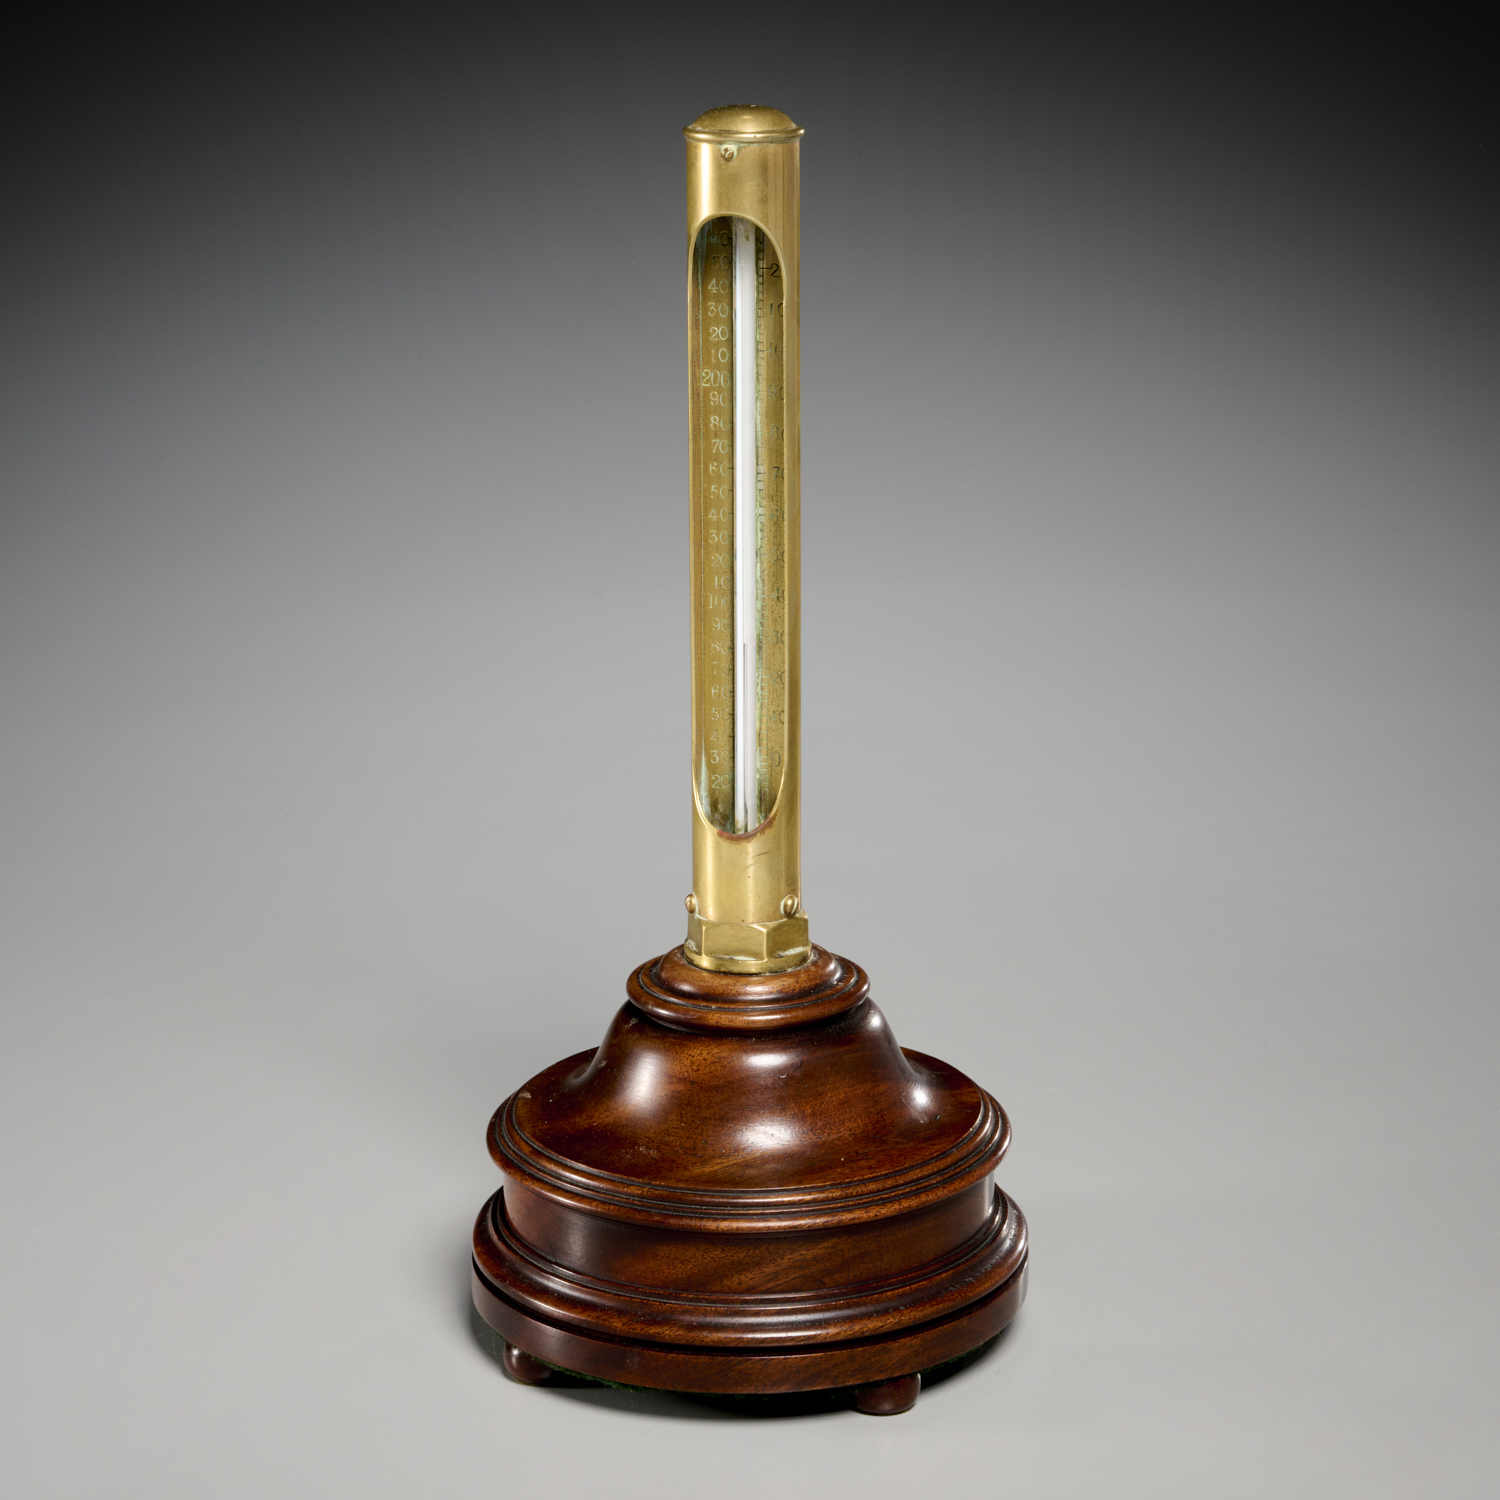 Edwardian brass and mahogany desk thermometer